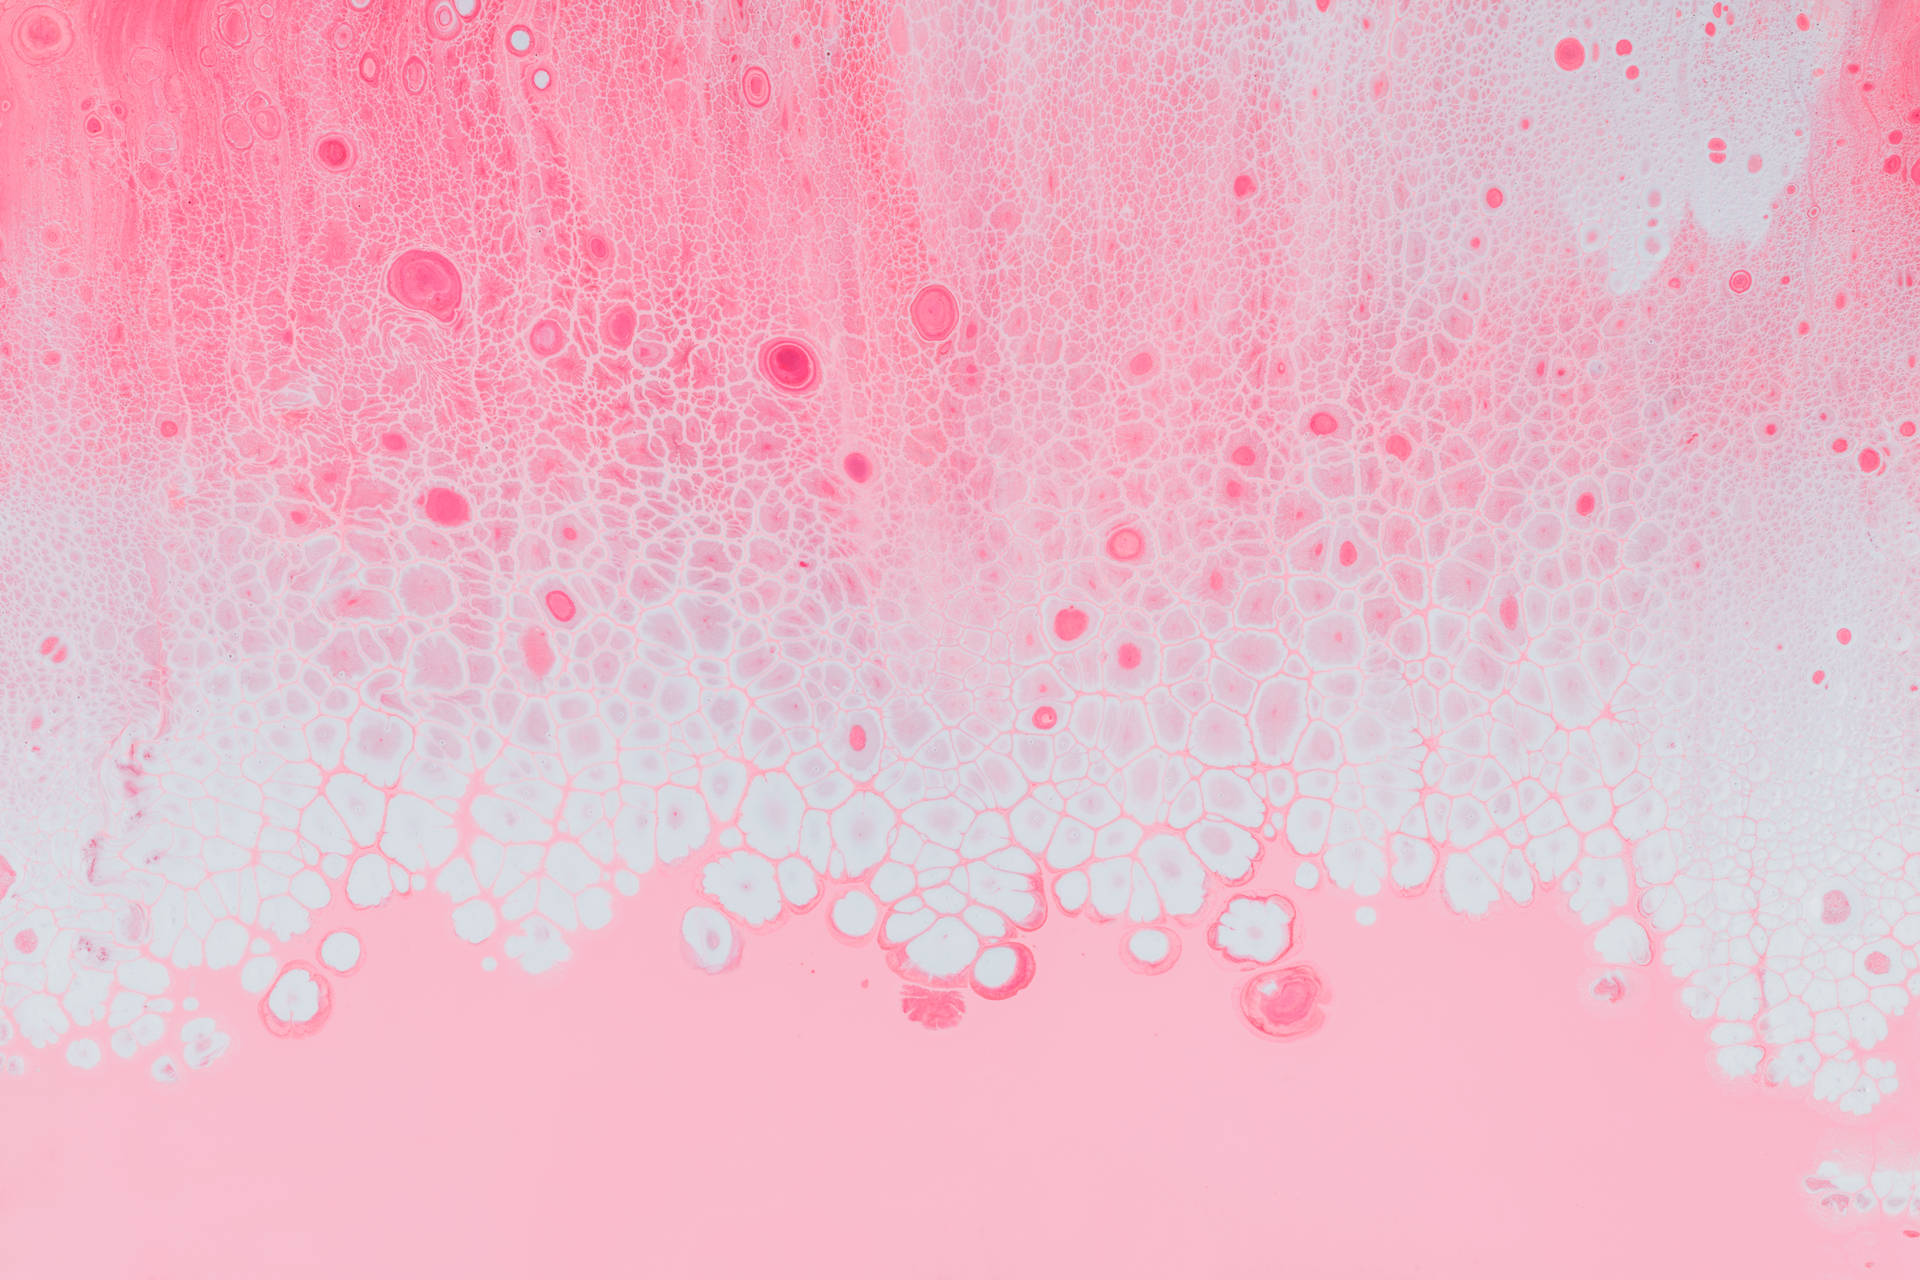 Pink Wall With Textured Paint Background